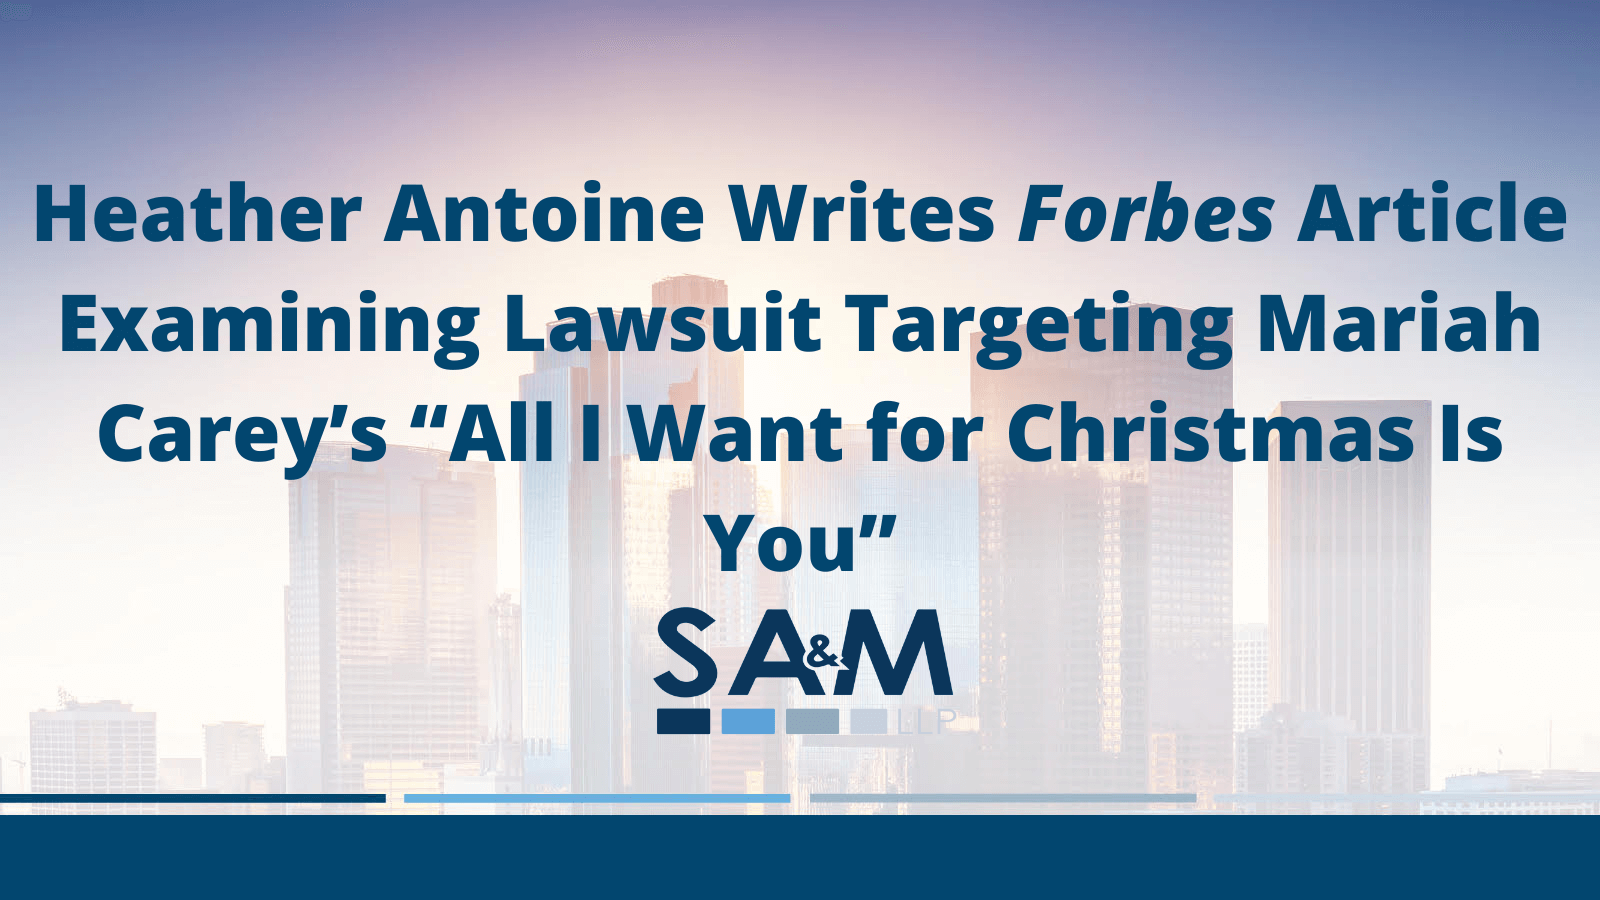 Heather Antoine Writes Forbes Article Examining Lawsuit Targeting Mariah Carey’s “All I Want for Christmas Is You”